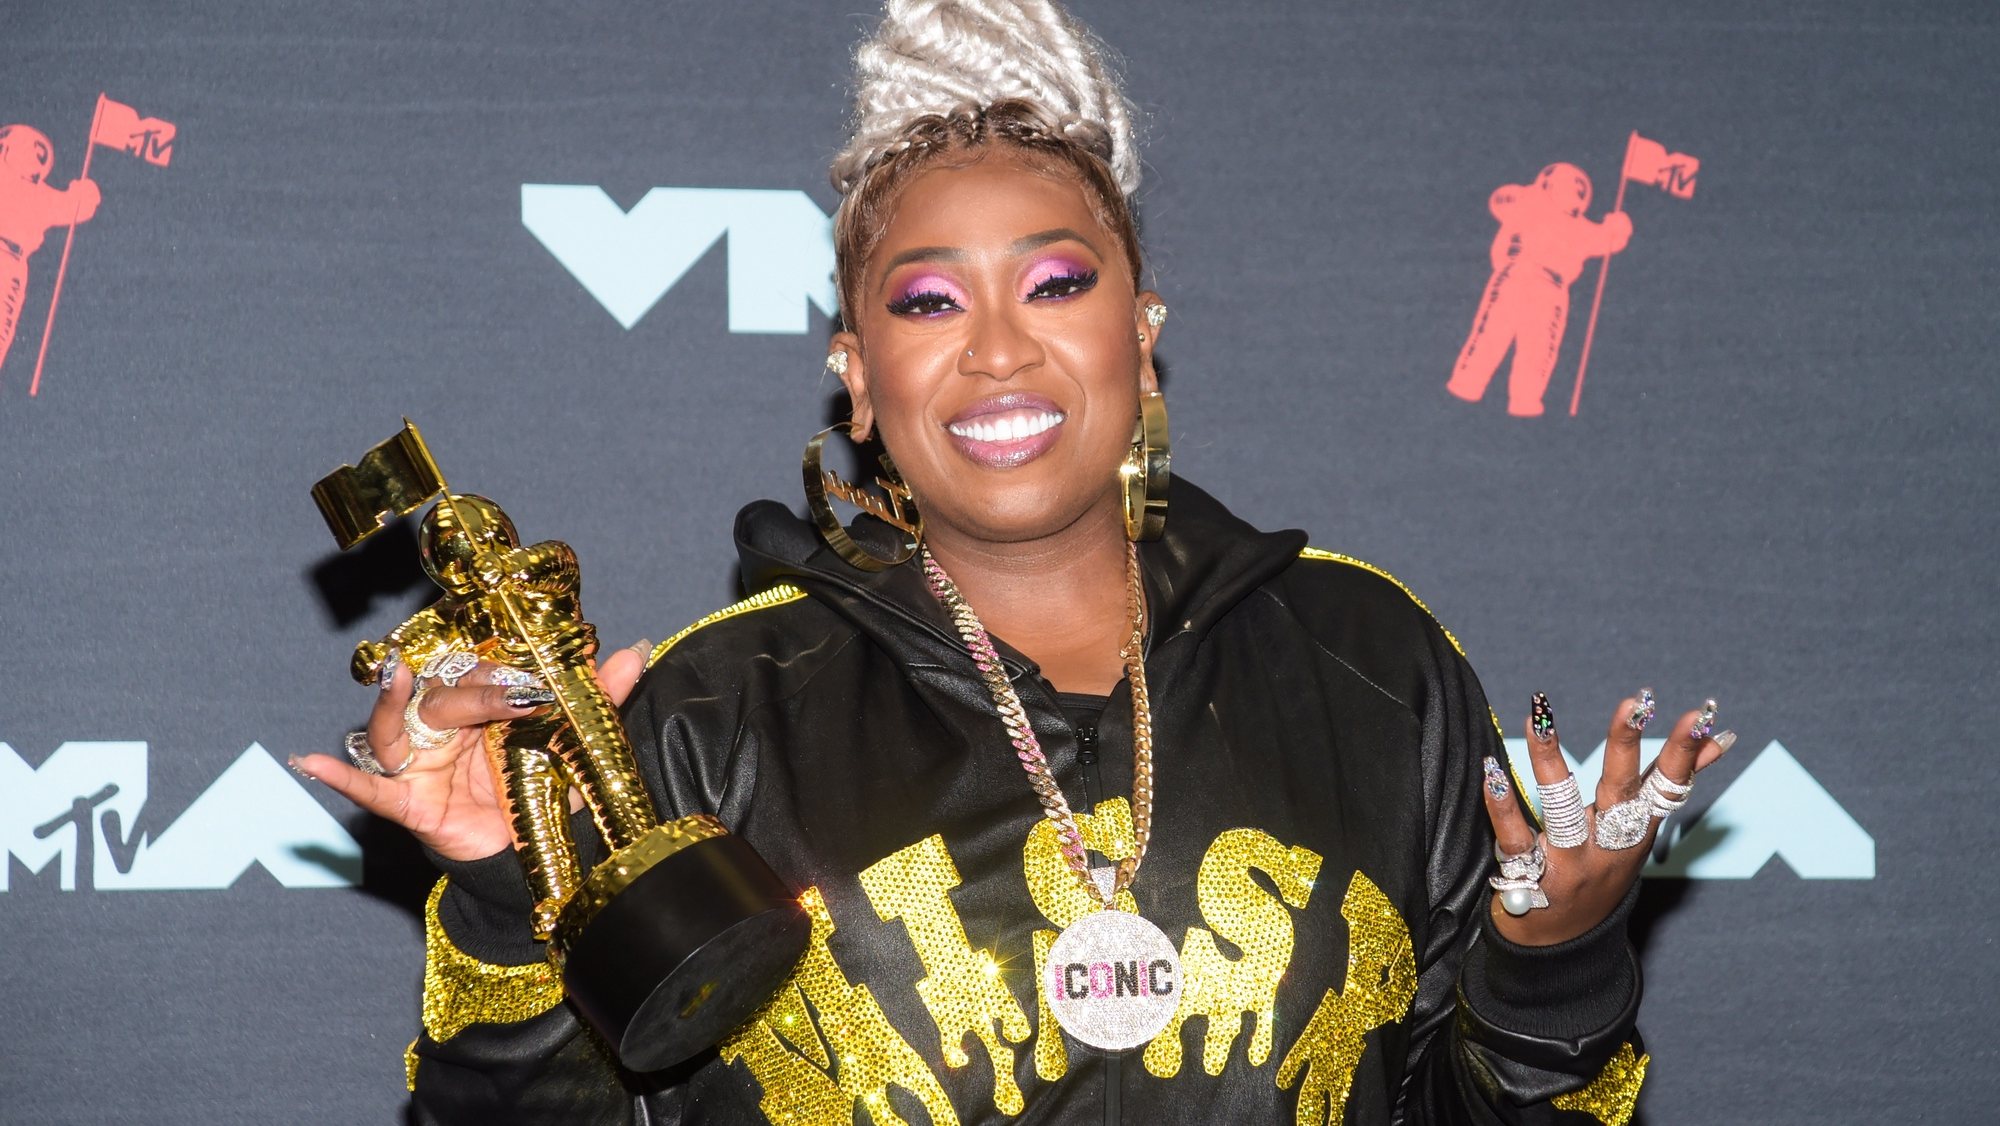 epa07796624 US rapper Missy Elliott poses in the Press Room with the Michael Jackson Video Vanguard Award during the 2019 MTV Video Music Awards at the Prudential Center in Newark, New Jersey, USA, 26 August 2019.  EPA/DJ JOHNSON